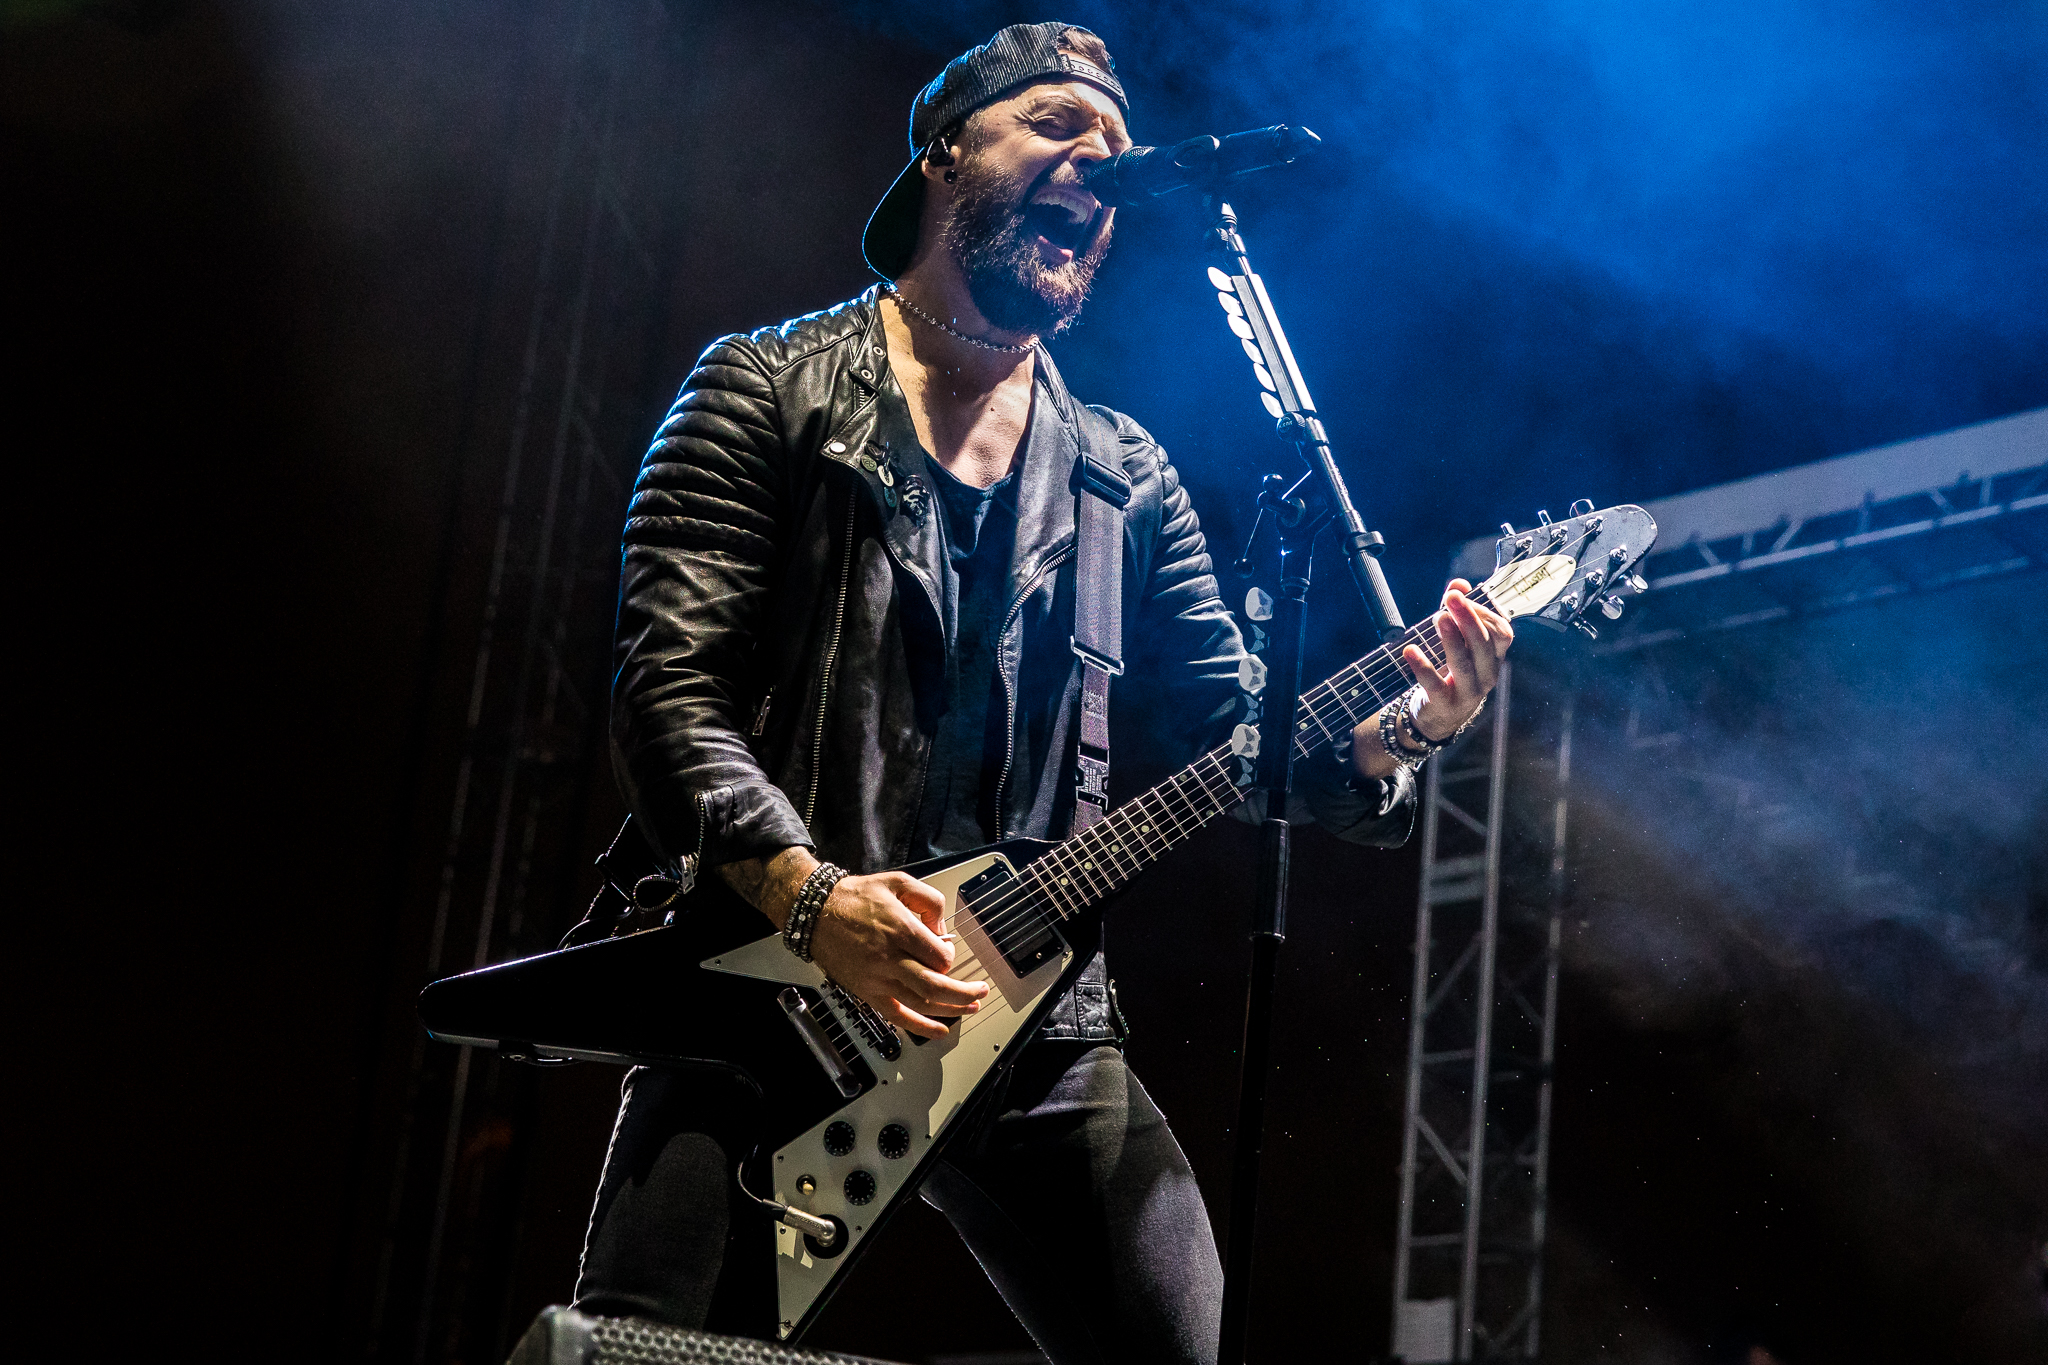 Bullet For My Valentine Announce New Album, Premiere First Single “Knives”